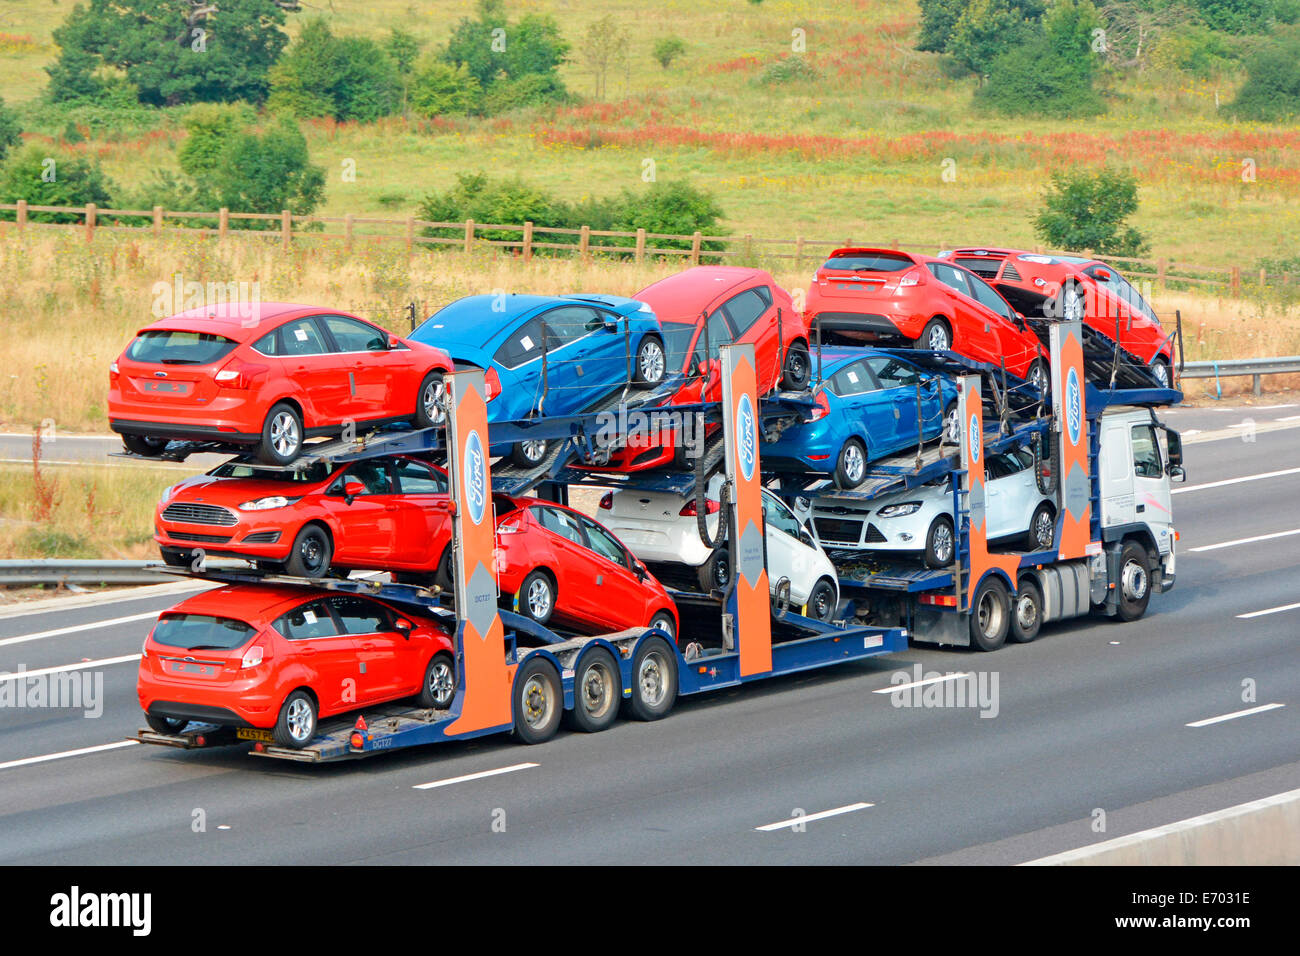 Ford motor company lorry truck car delivery transporter with trailer loaded with eleven new red white & blue cars driving on motorway Essex England UK Stock Photo